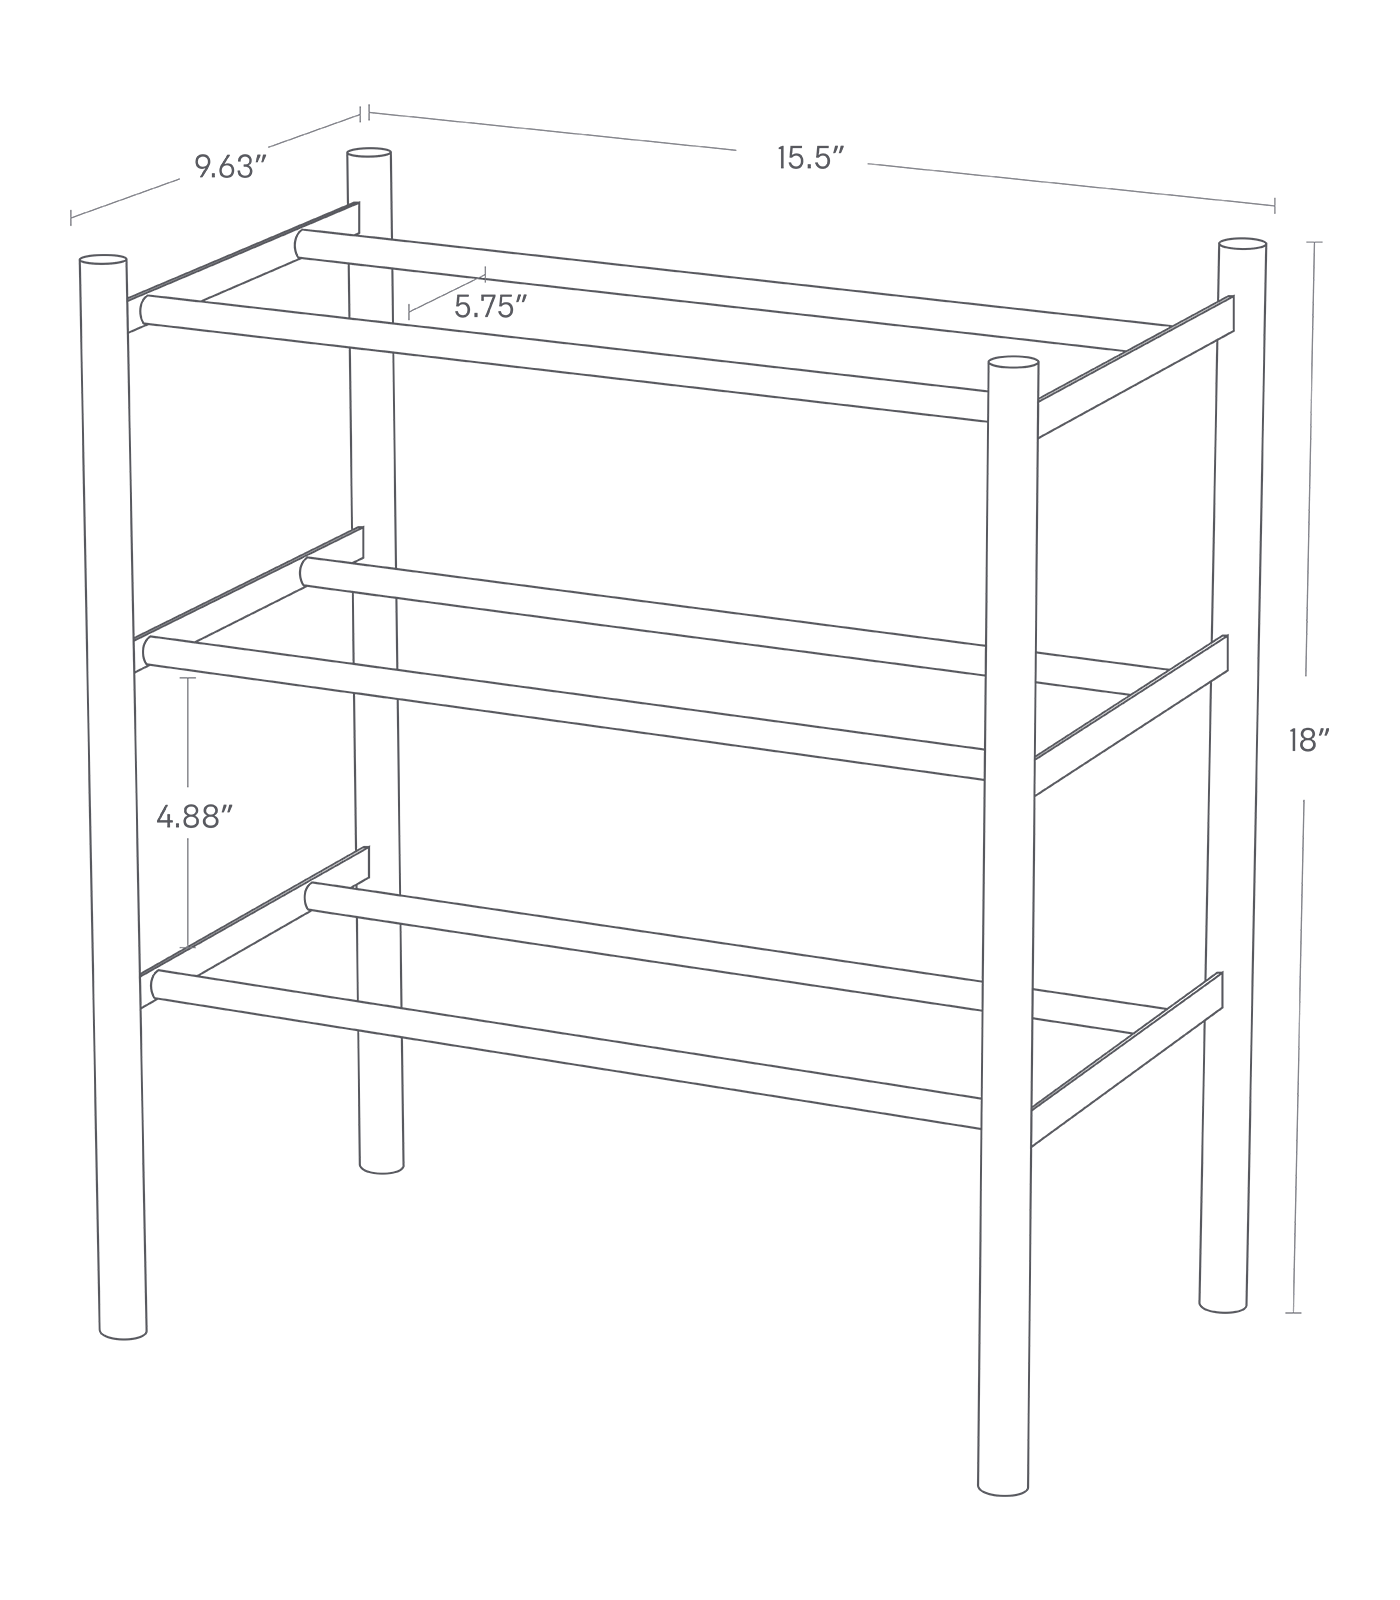 Dimension image for Expandable Shoe Rack on a white background including dimensions  L 9.84 x W 16.14 x H 17.91 inches